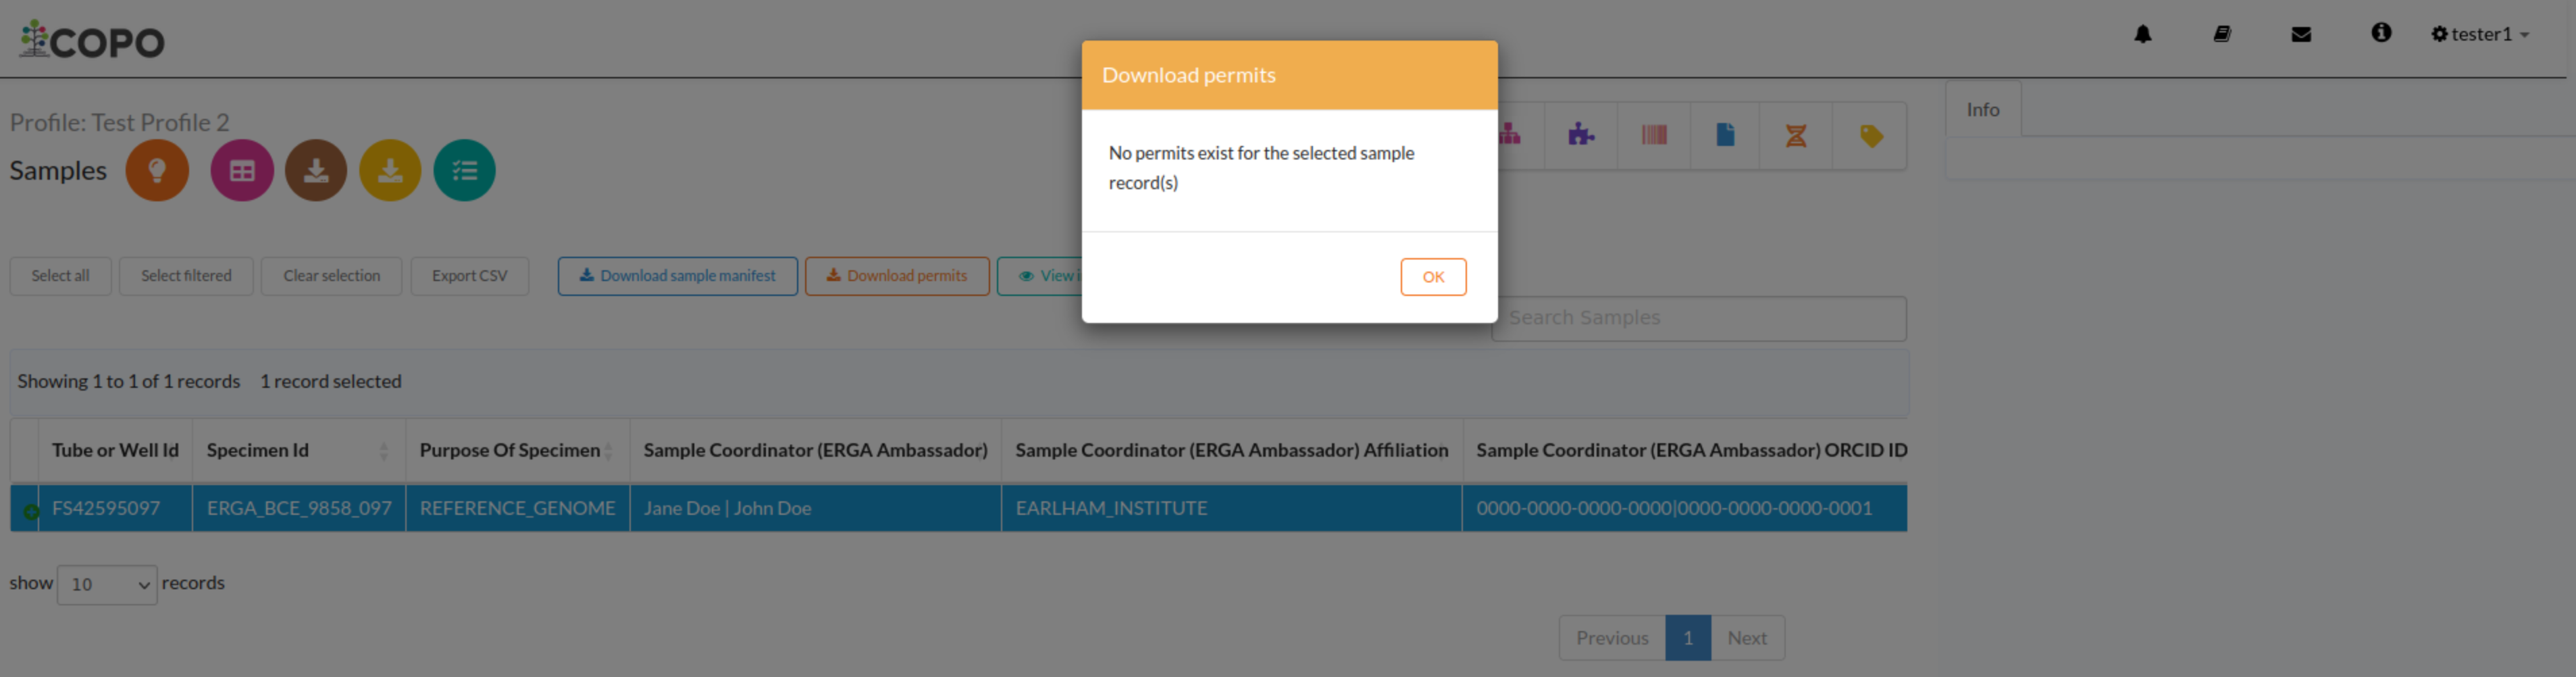 No permits exists message in popup dialogue for selected sample record(s)